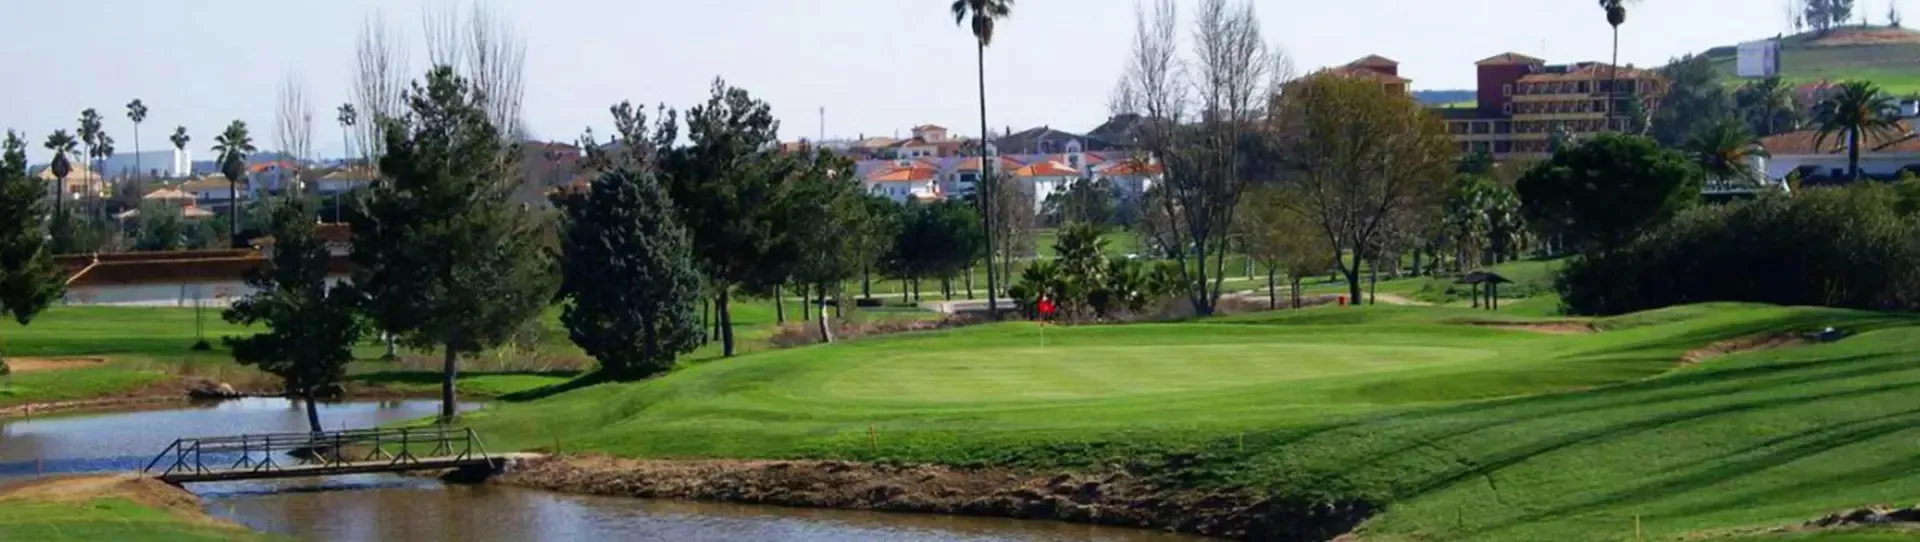 Spain golf courses - Guadiana Golf Course - Photo 3